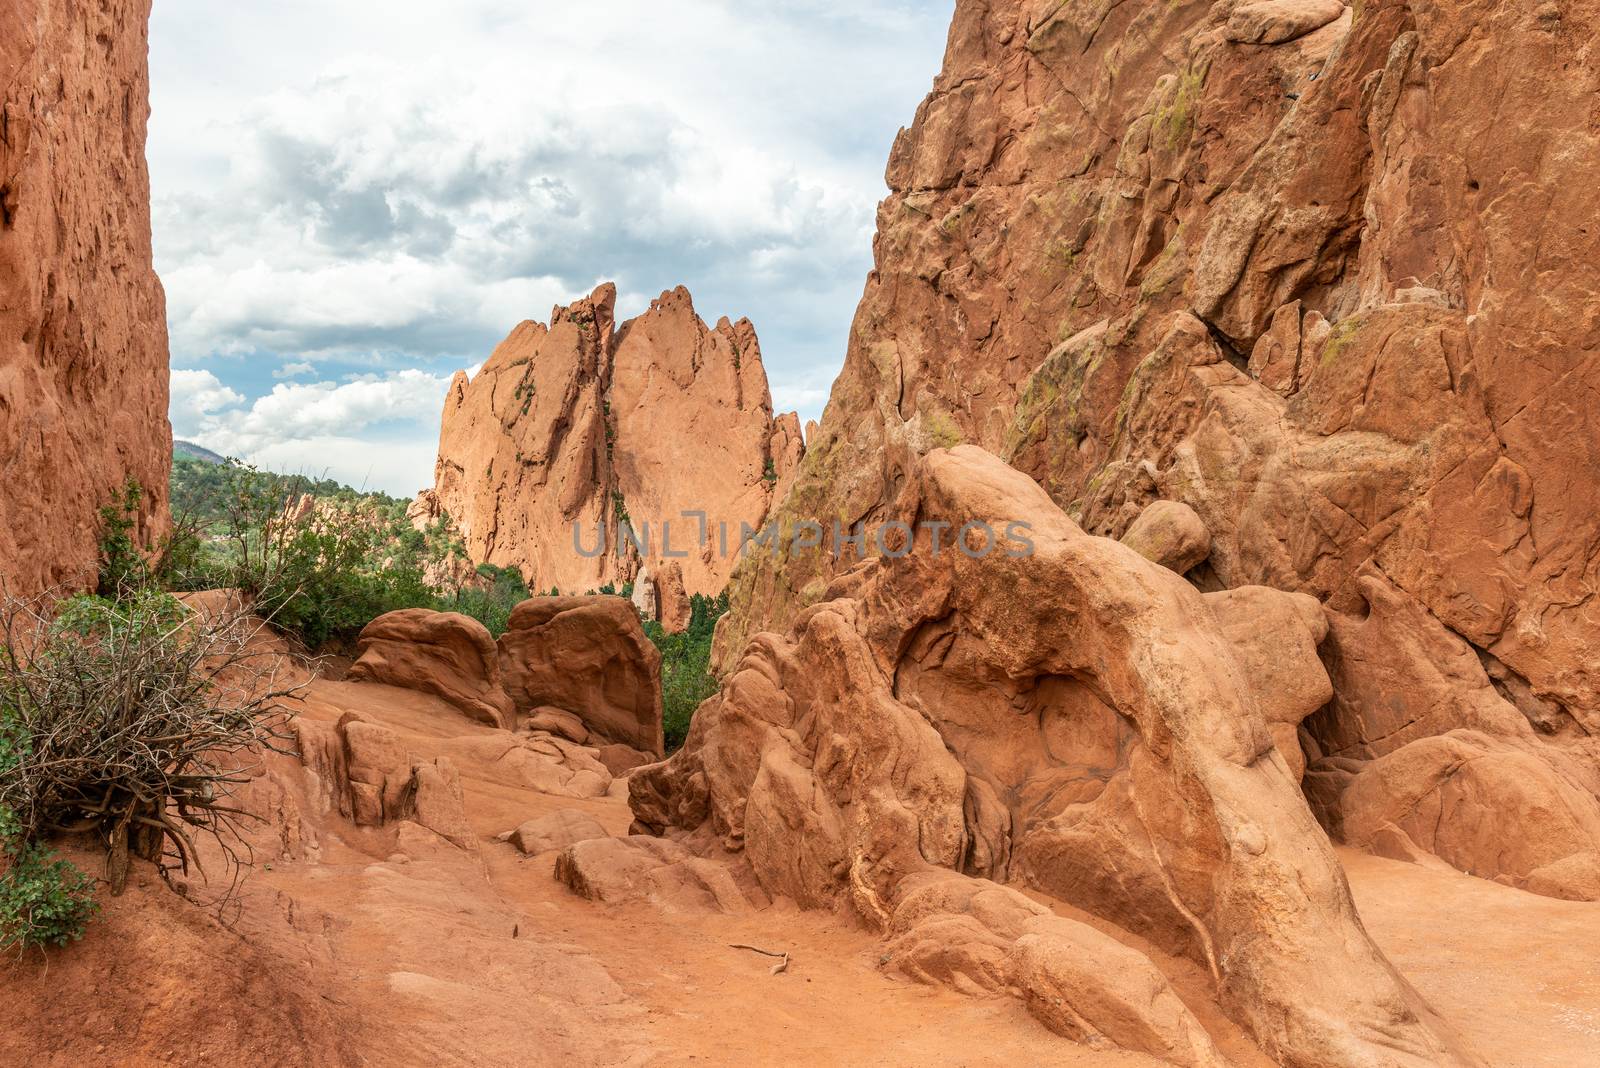 Sandstone formations along Central Garden Trail in Garden of the Gods, Colorado by Njean